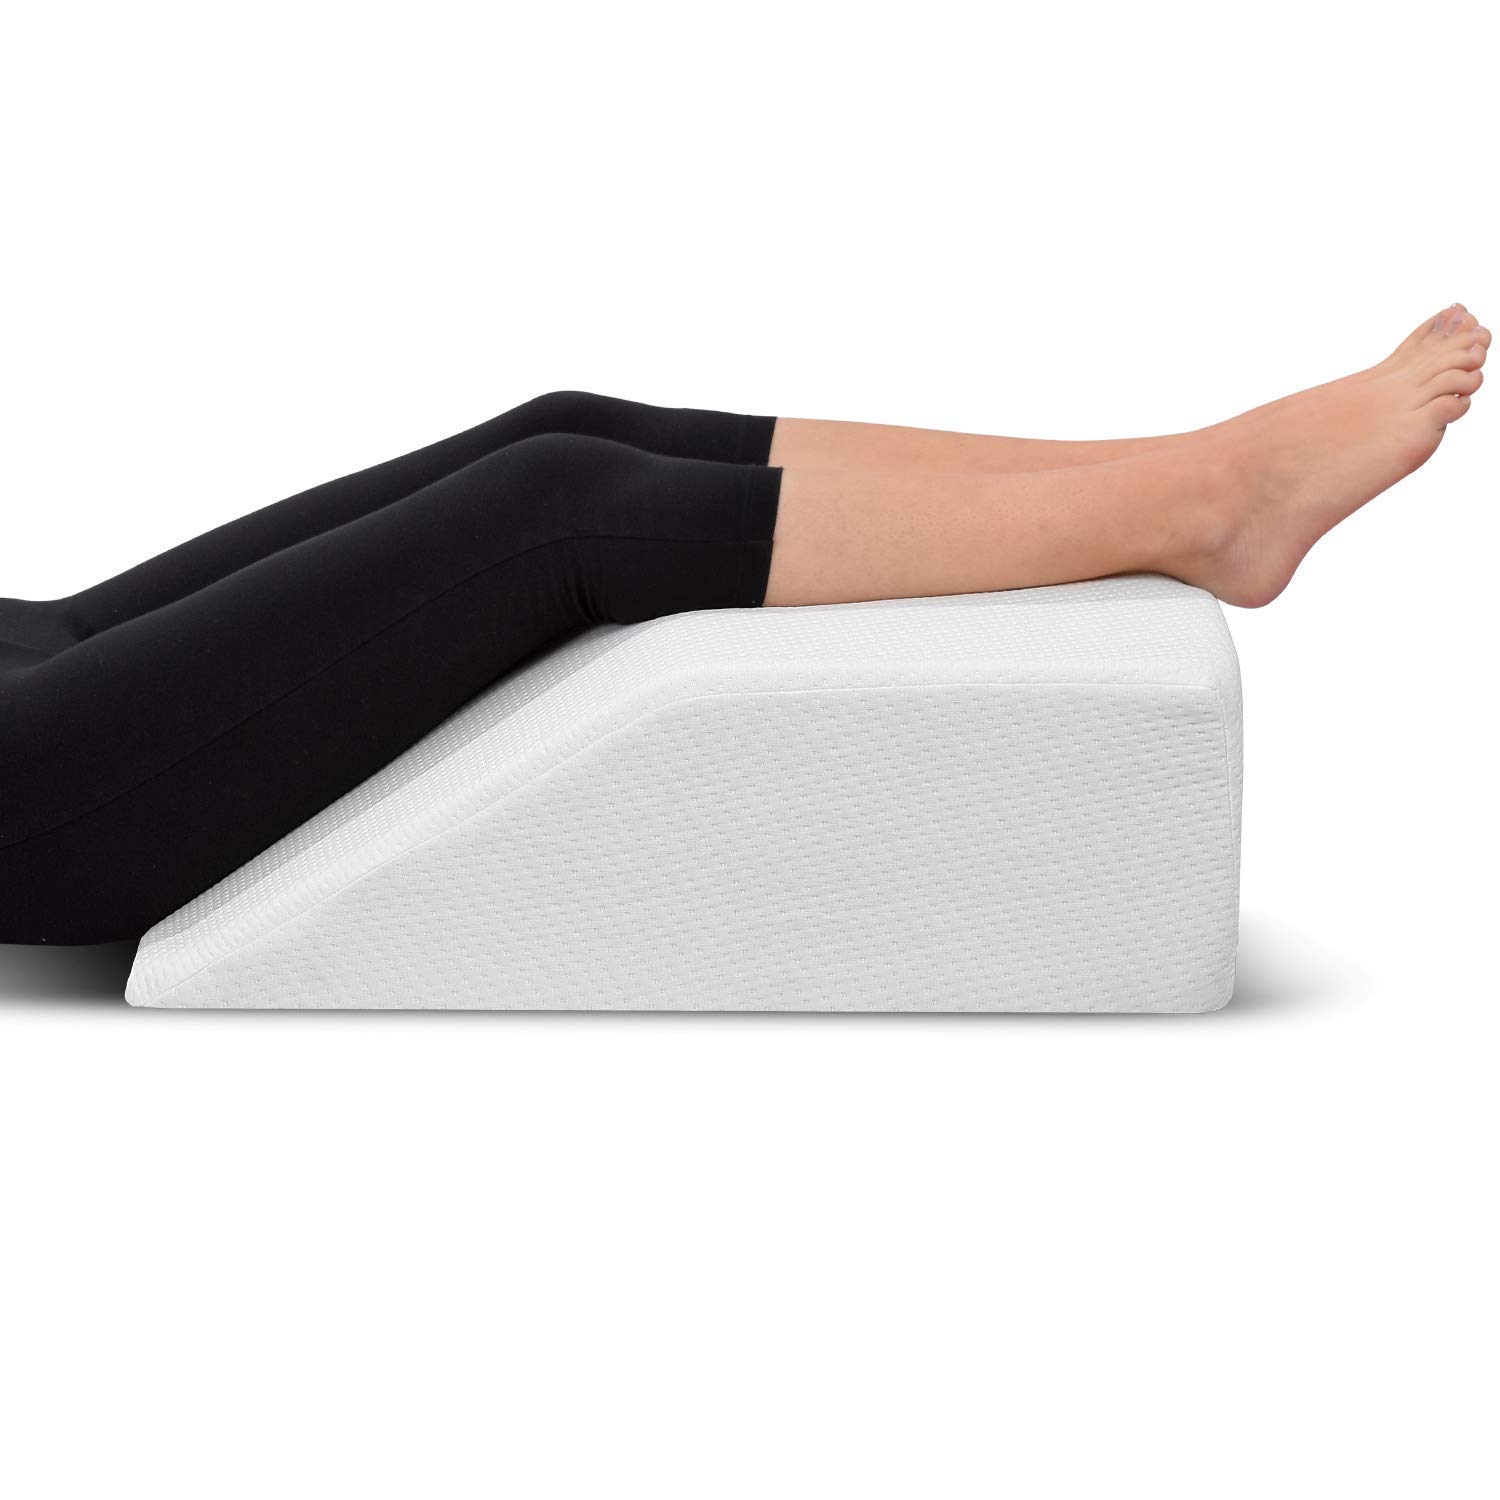 Leg Elevation Pillow and Bed Wedge Pillow Bundle - Memory Foam Top- Sleeping, Reading, Relaxing - Pain Relief for Hips, Back, Neck, Legs and Knees - For Snoring, Acid Reflux, Swelling - Washable Cover